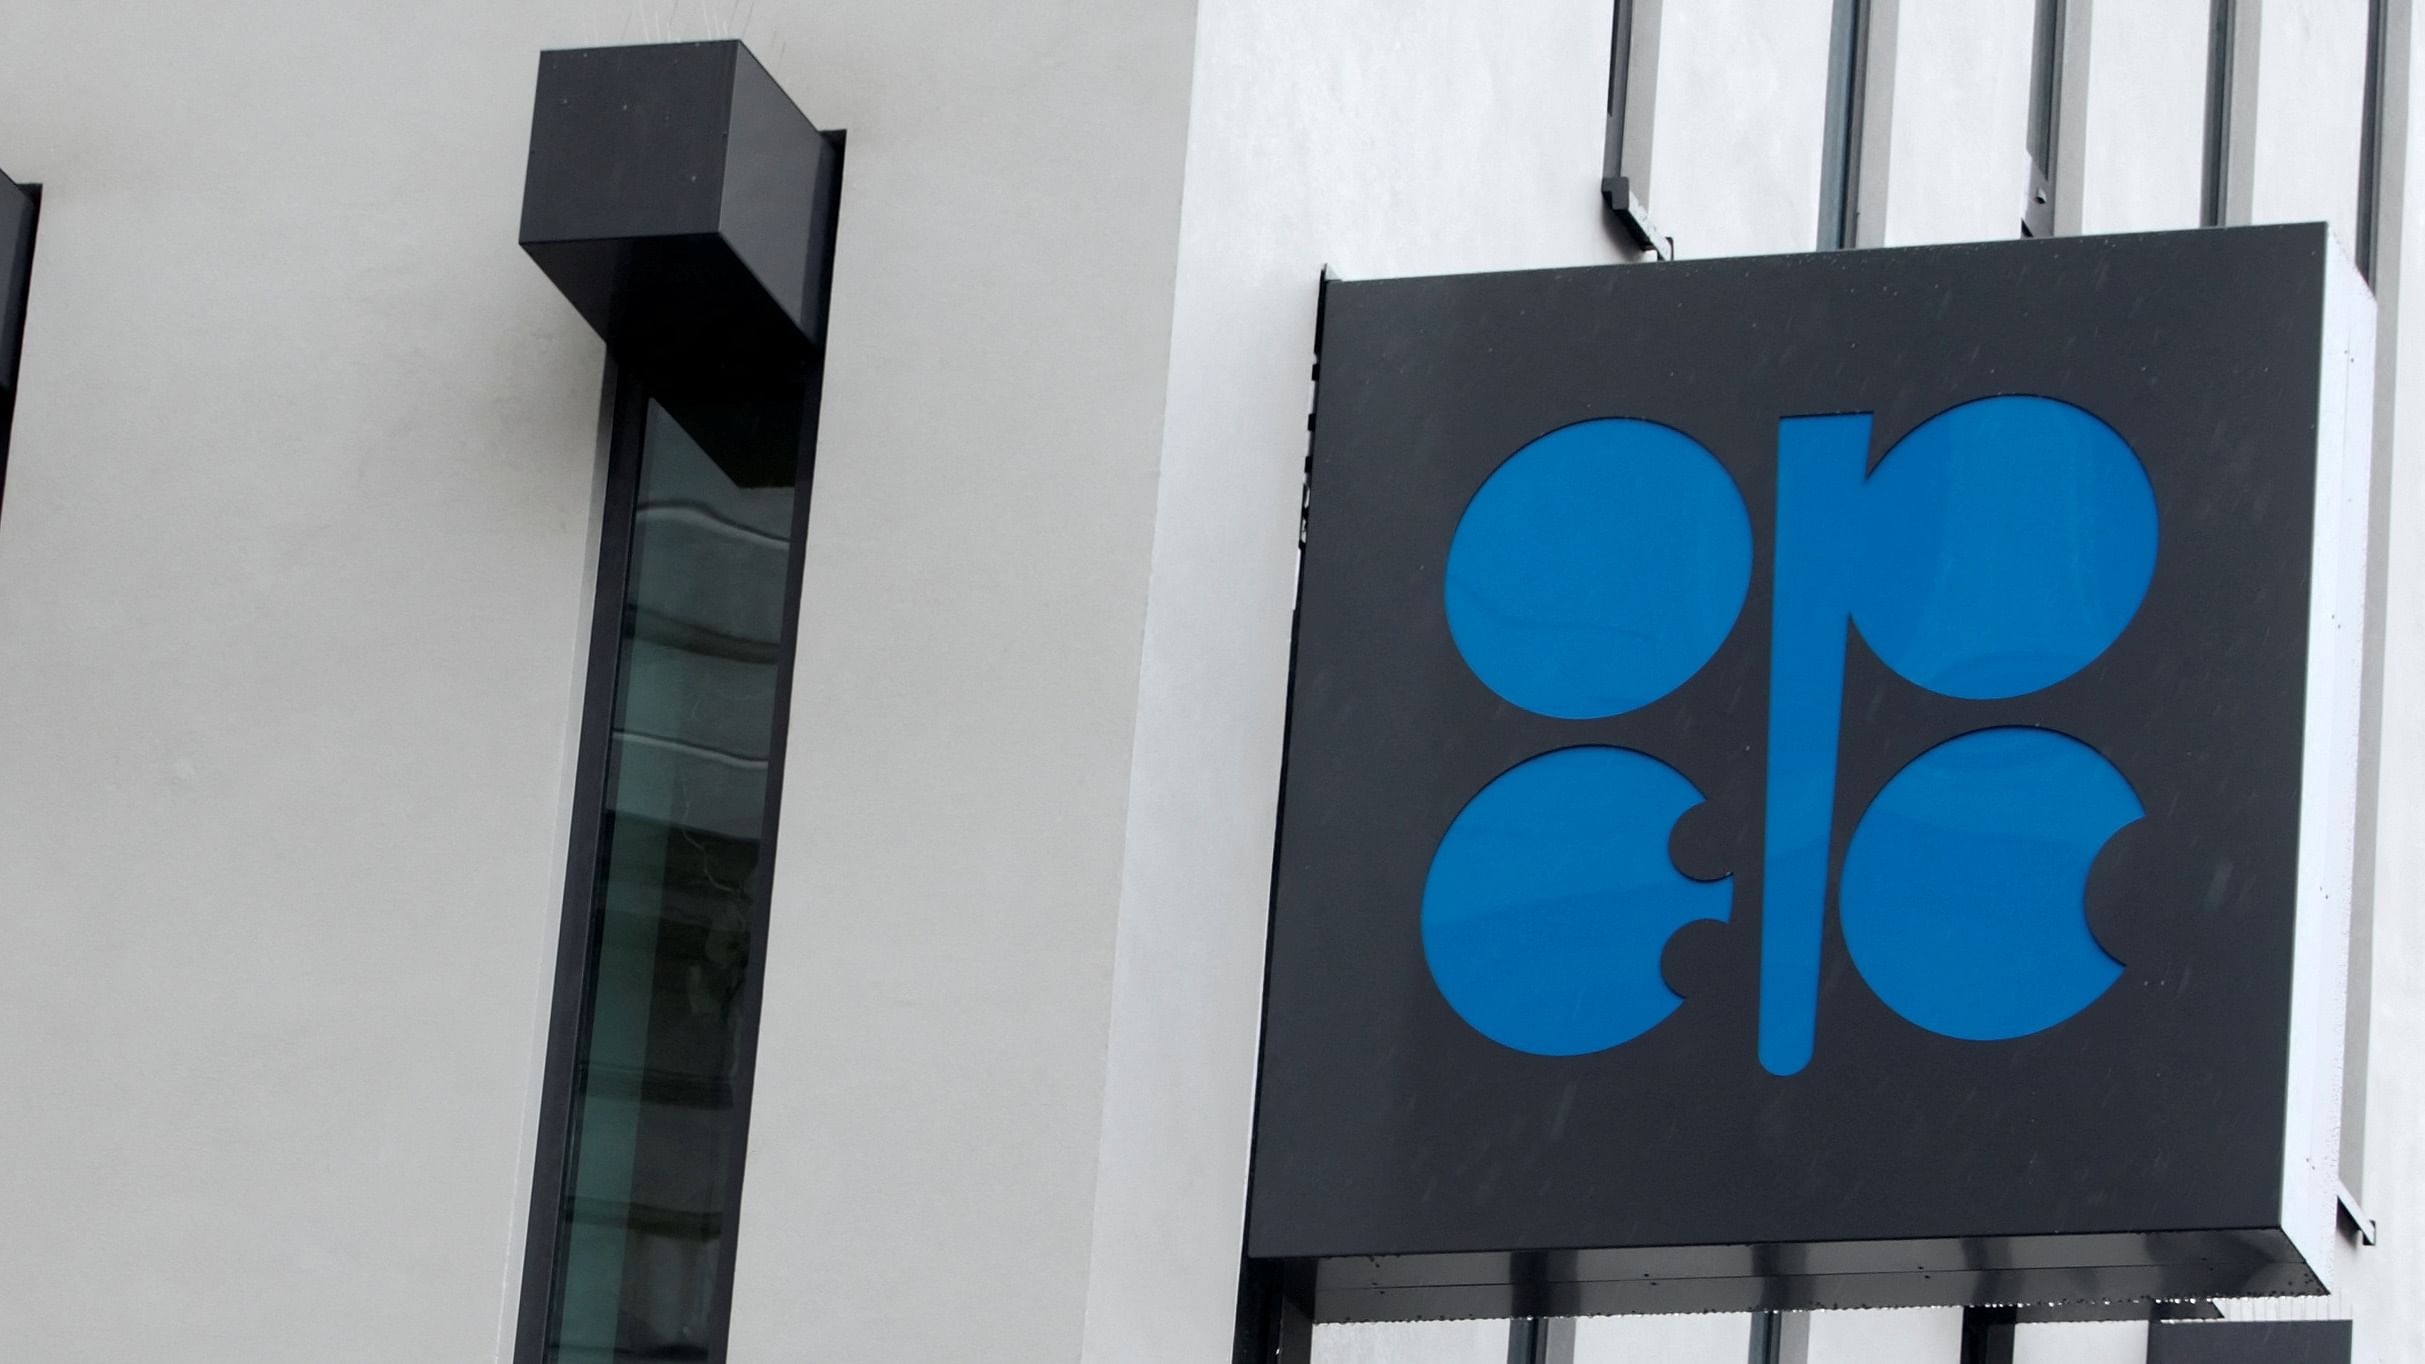 The 13 core members of OPEC, led by Saudi Arabia, and the 10 further states in OPEC+, chief among them Russia find themselves at a crossroads. Credit: Reuters File Photo